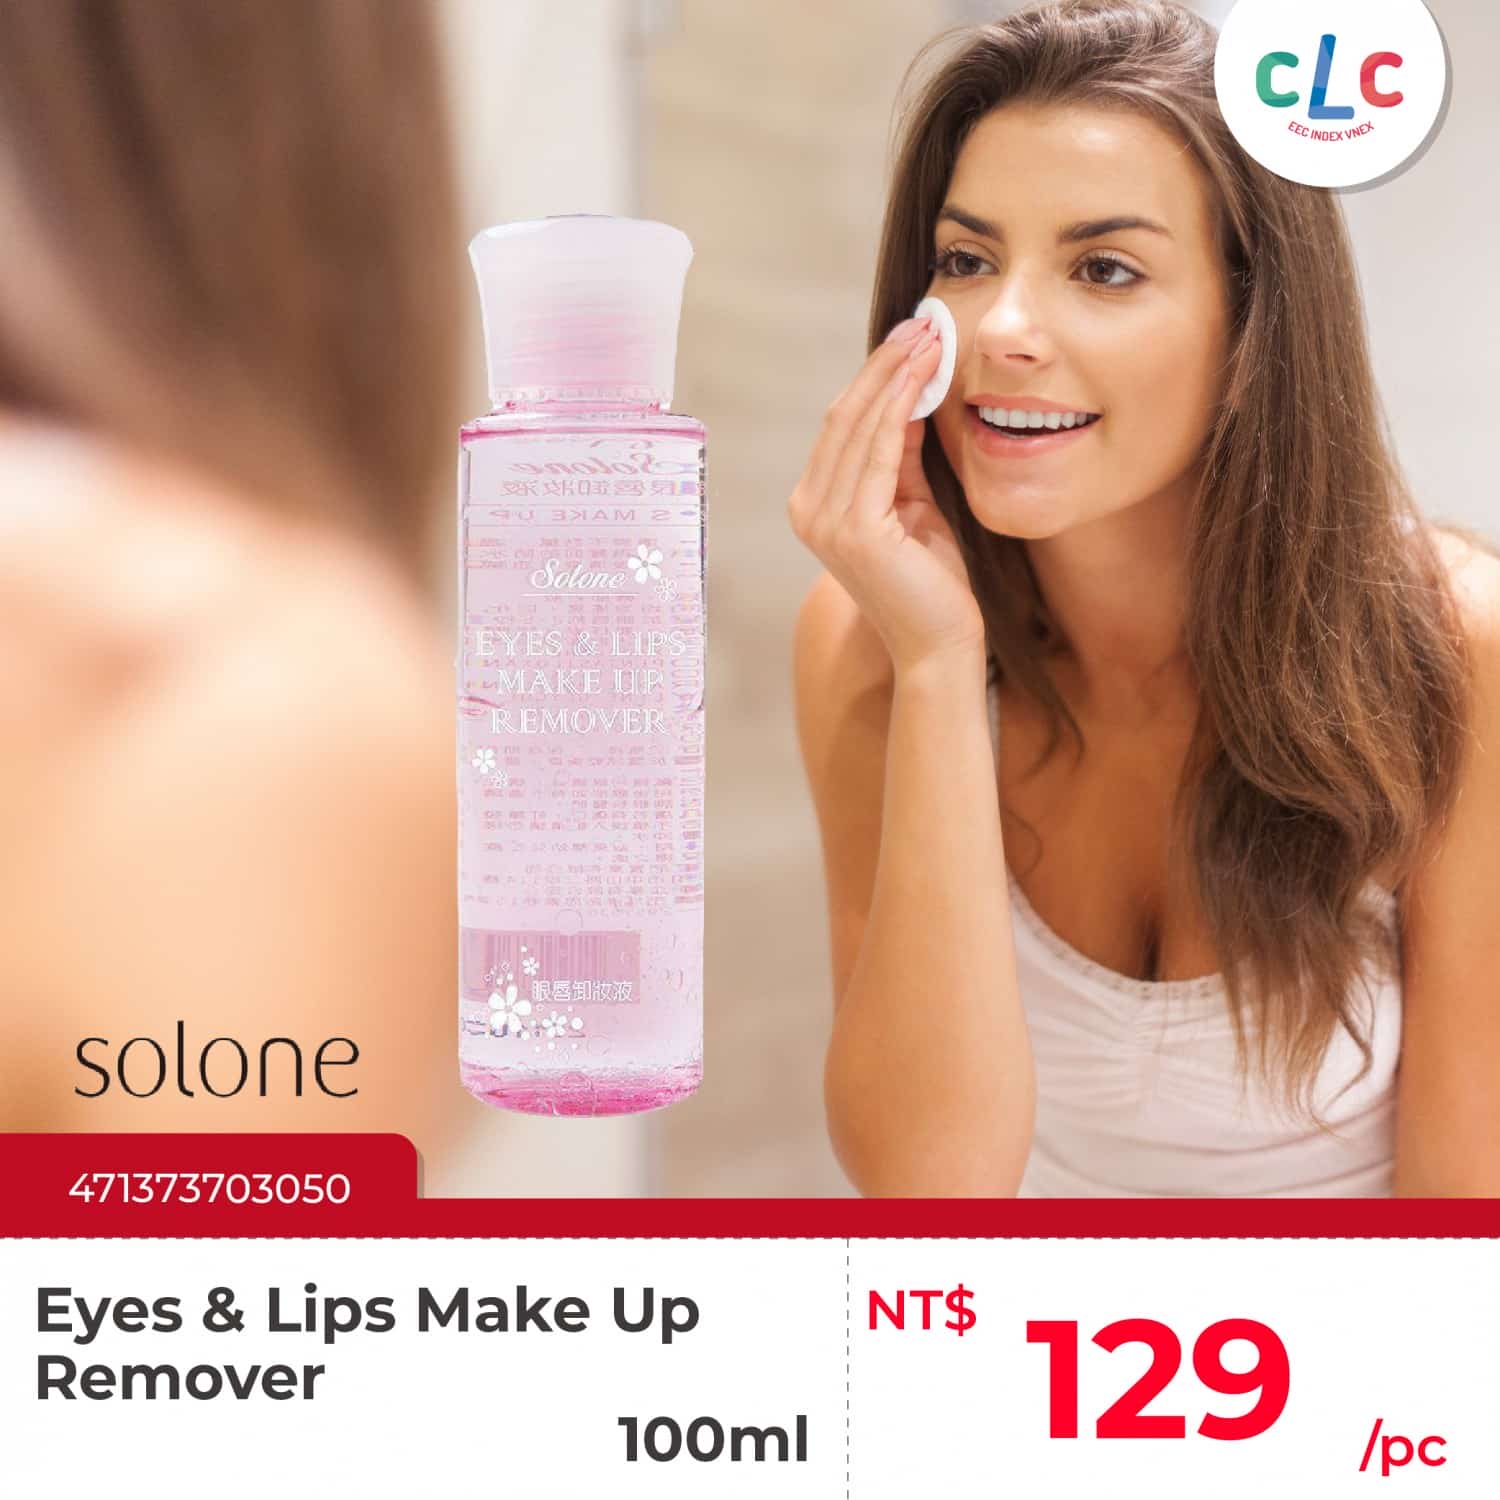 Solone Eyes & Lips Make Up Remover 100ml